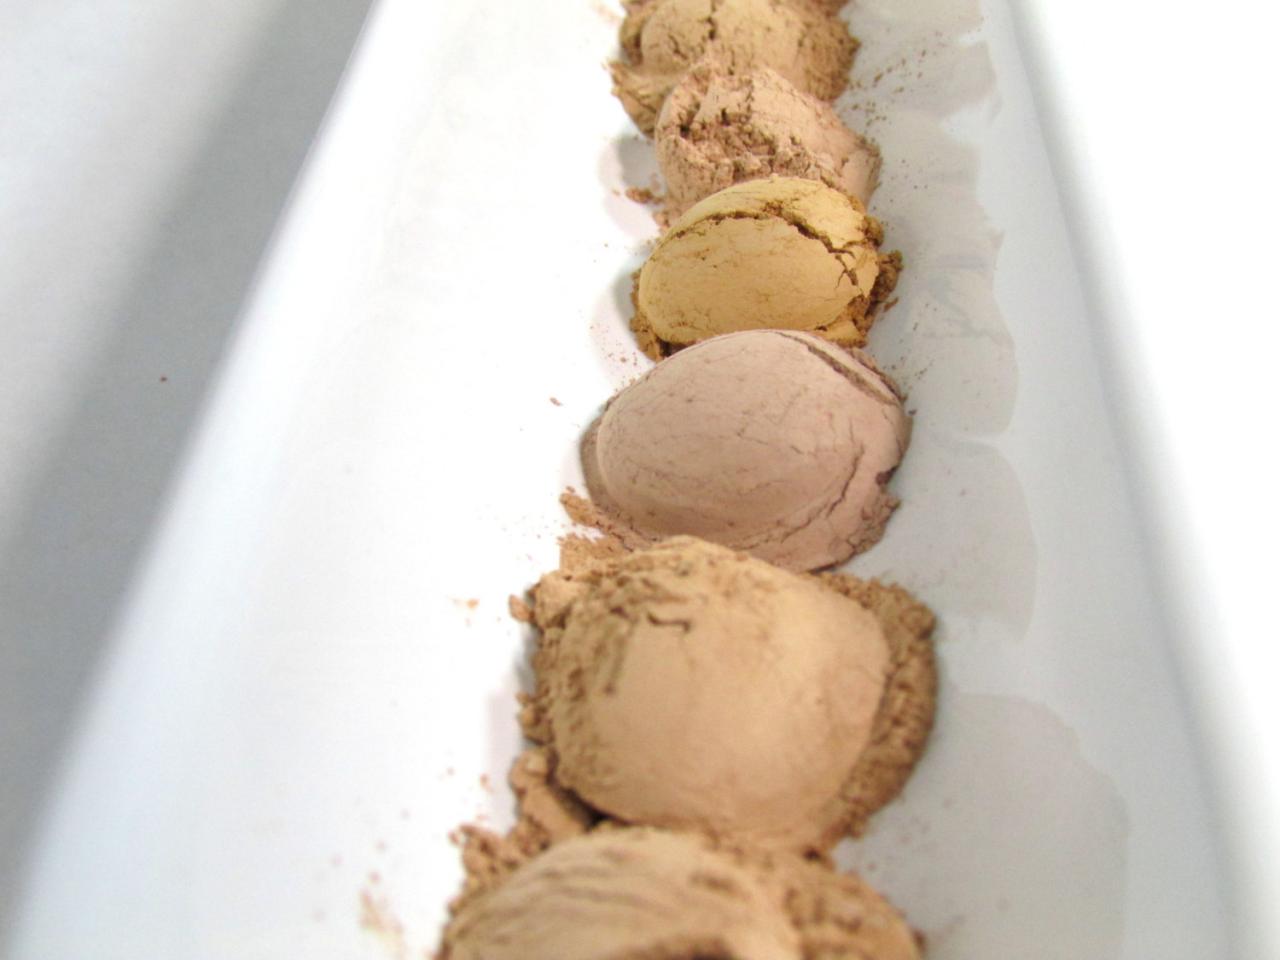 Foundation Mineral Makeup Sample - Choose Your Shade